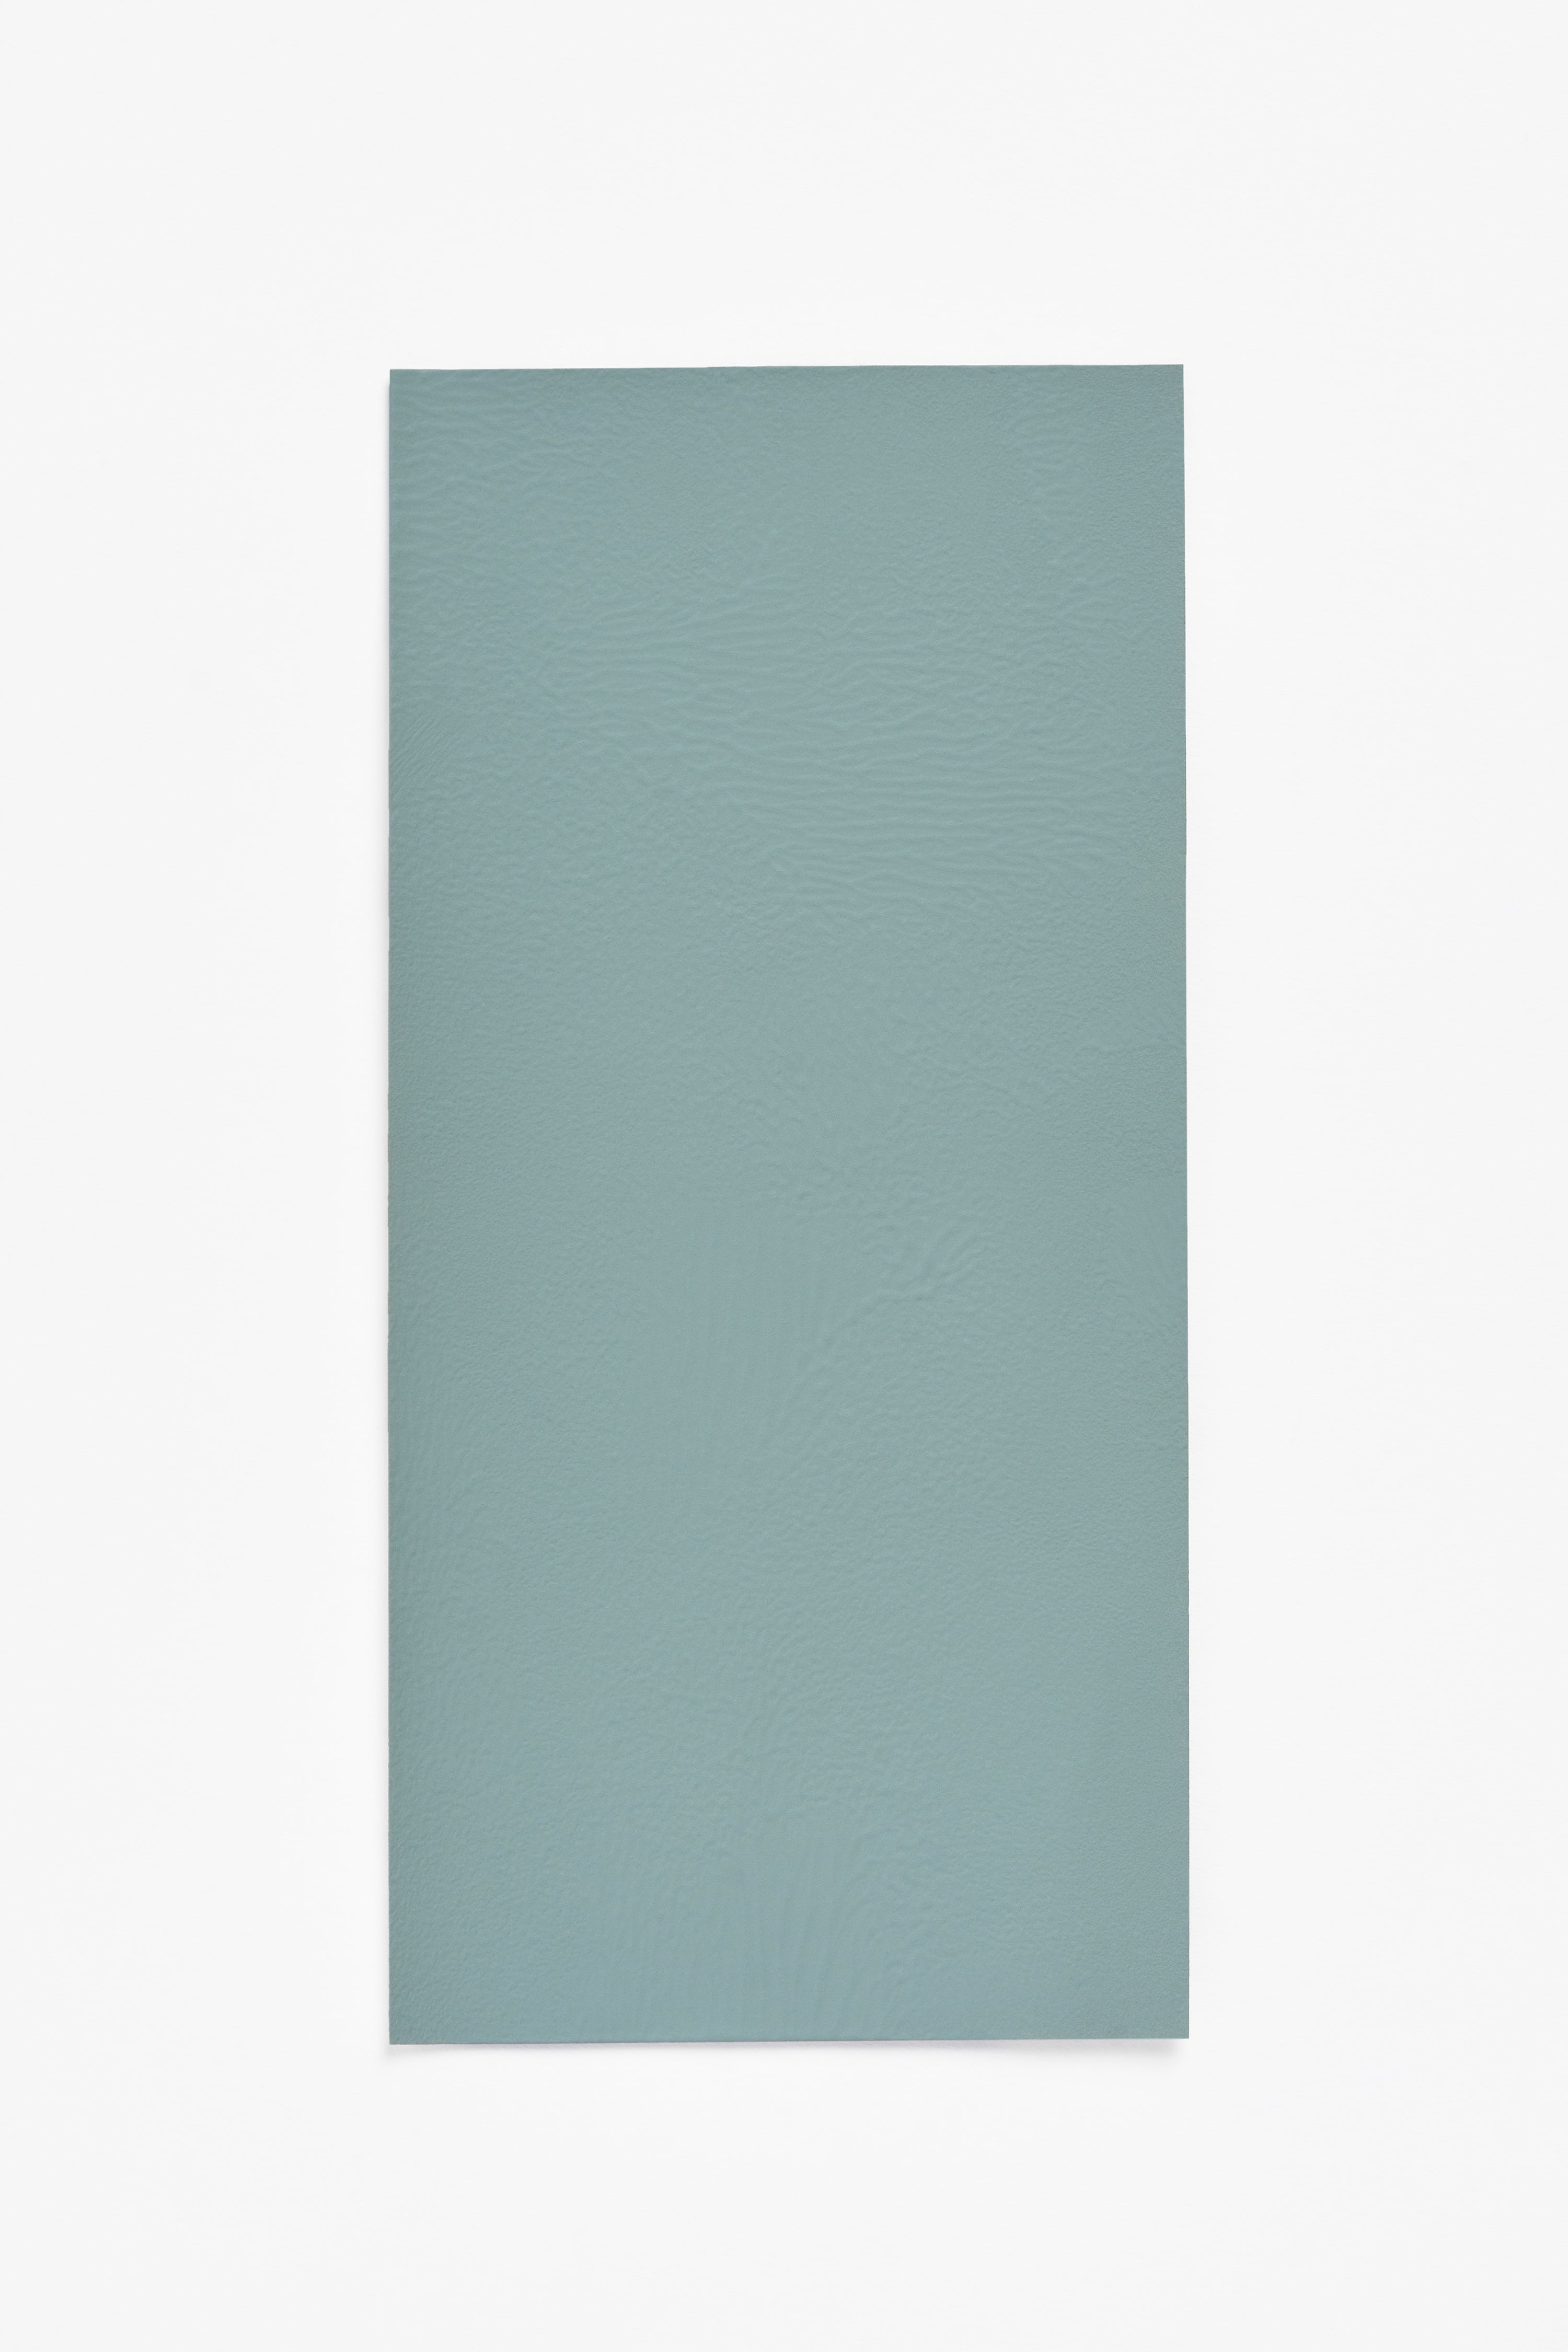 Cyprus — a paint colour developed by Barber Osgerby for Blēo